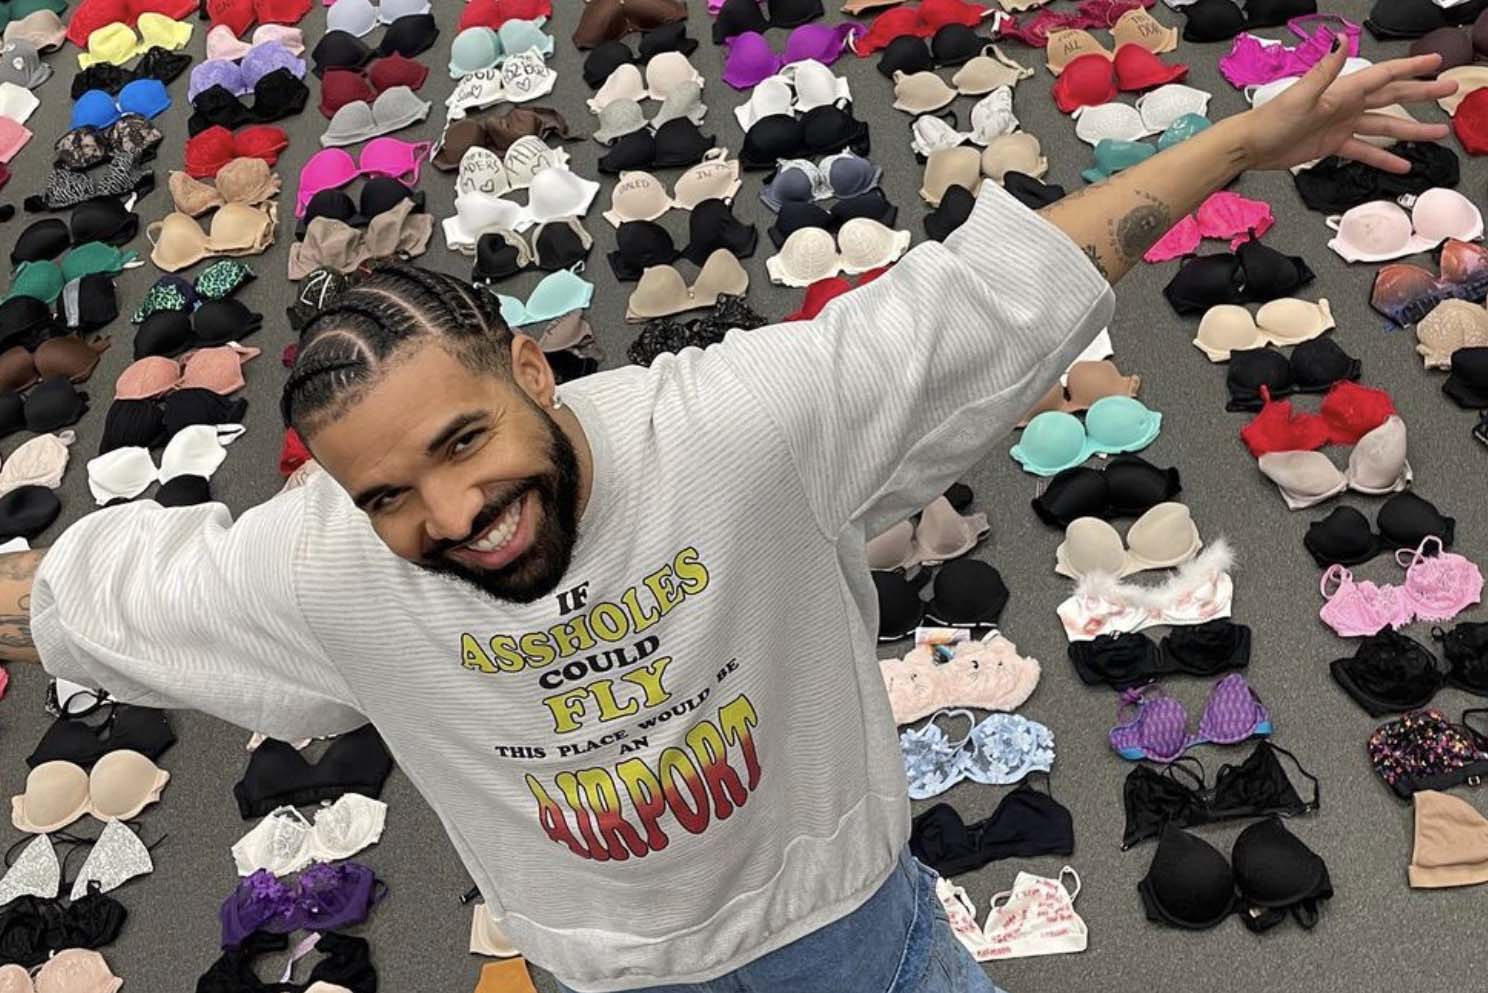 Drake poses with bra collection (Image: Instagram)